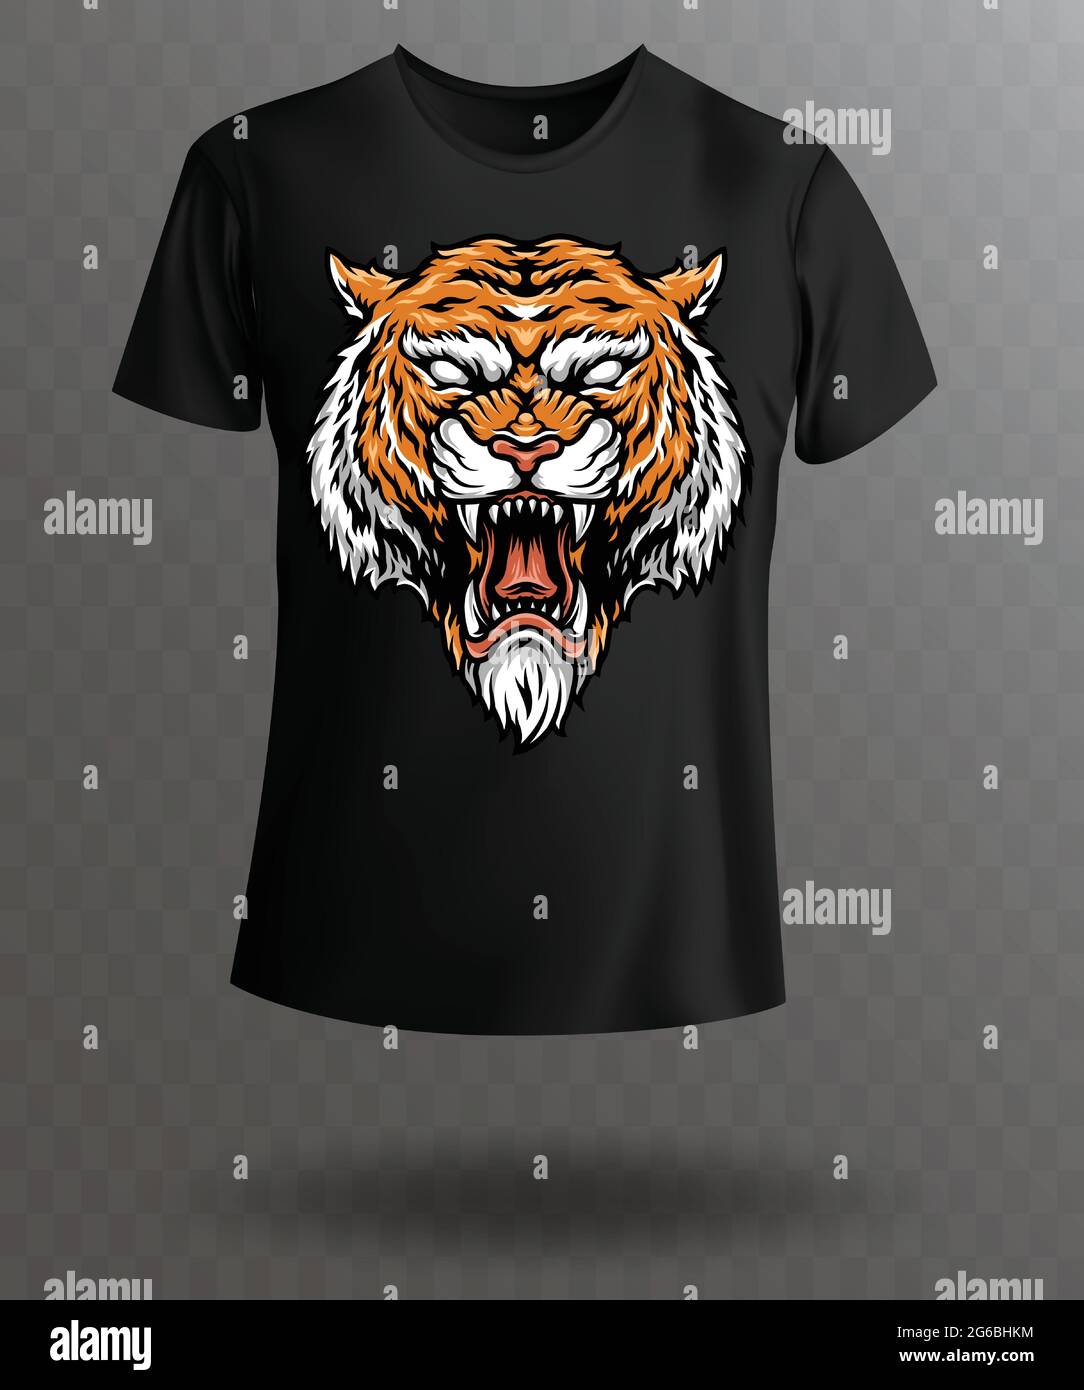 Stylish t-shirt and apparel trendy design with tiger's head Stock